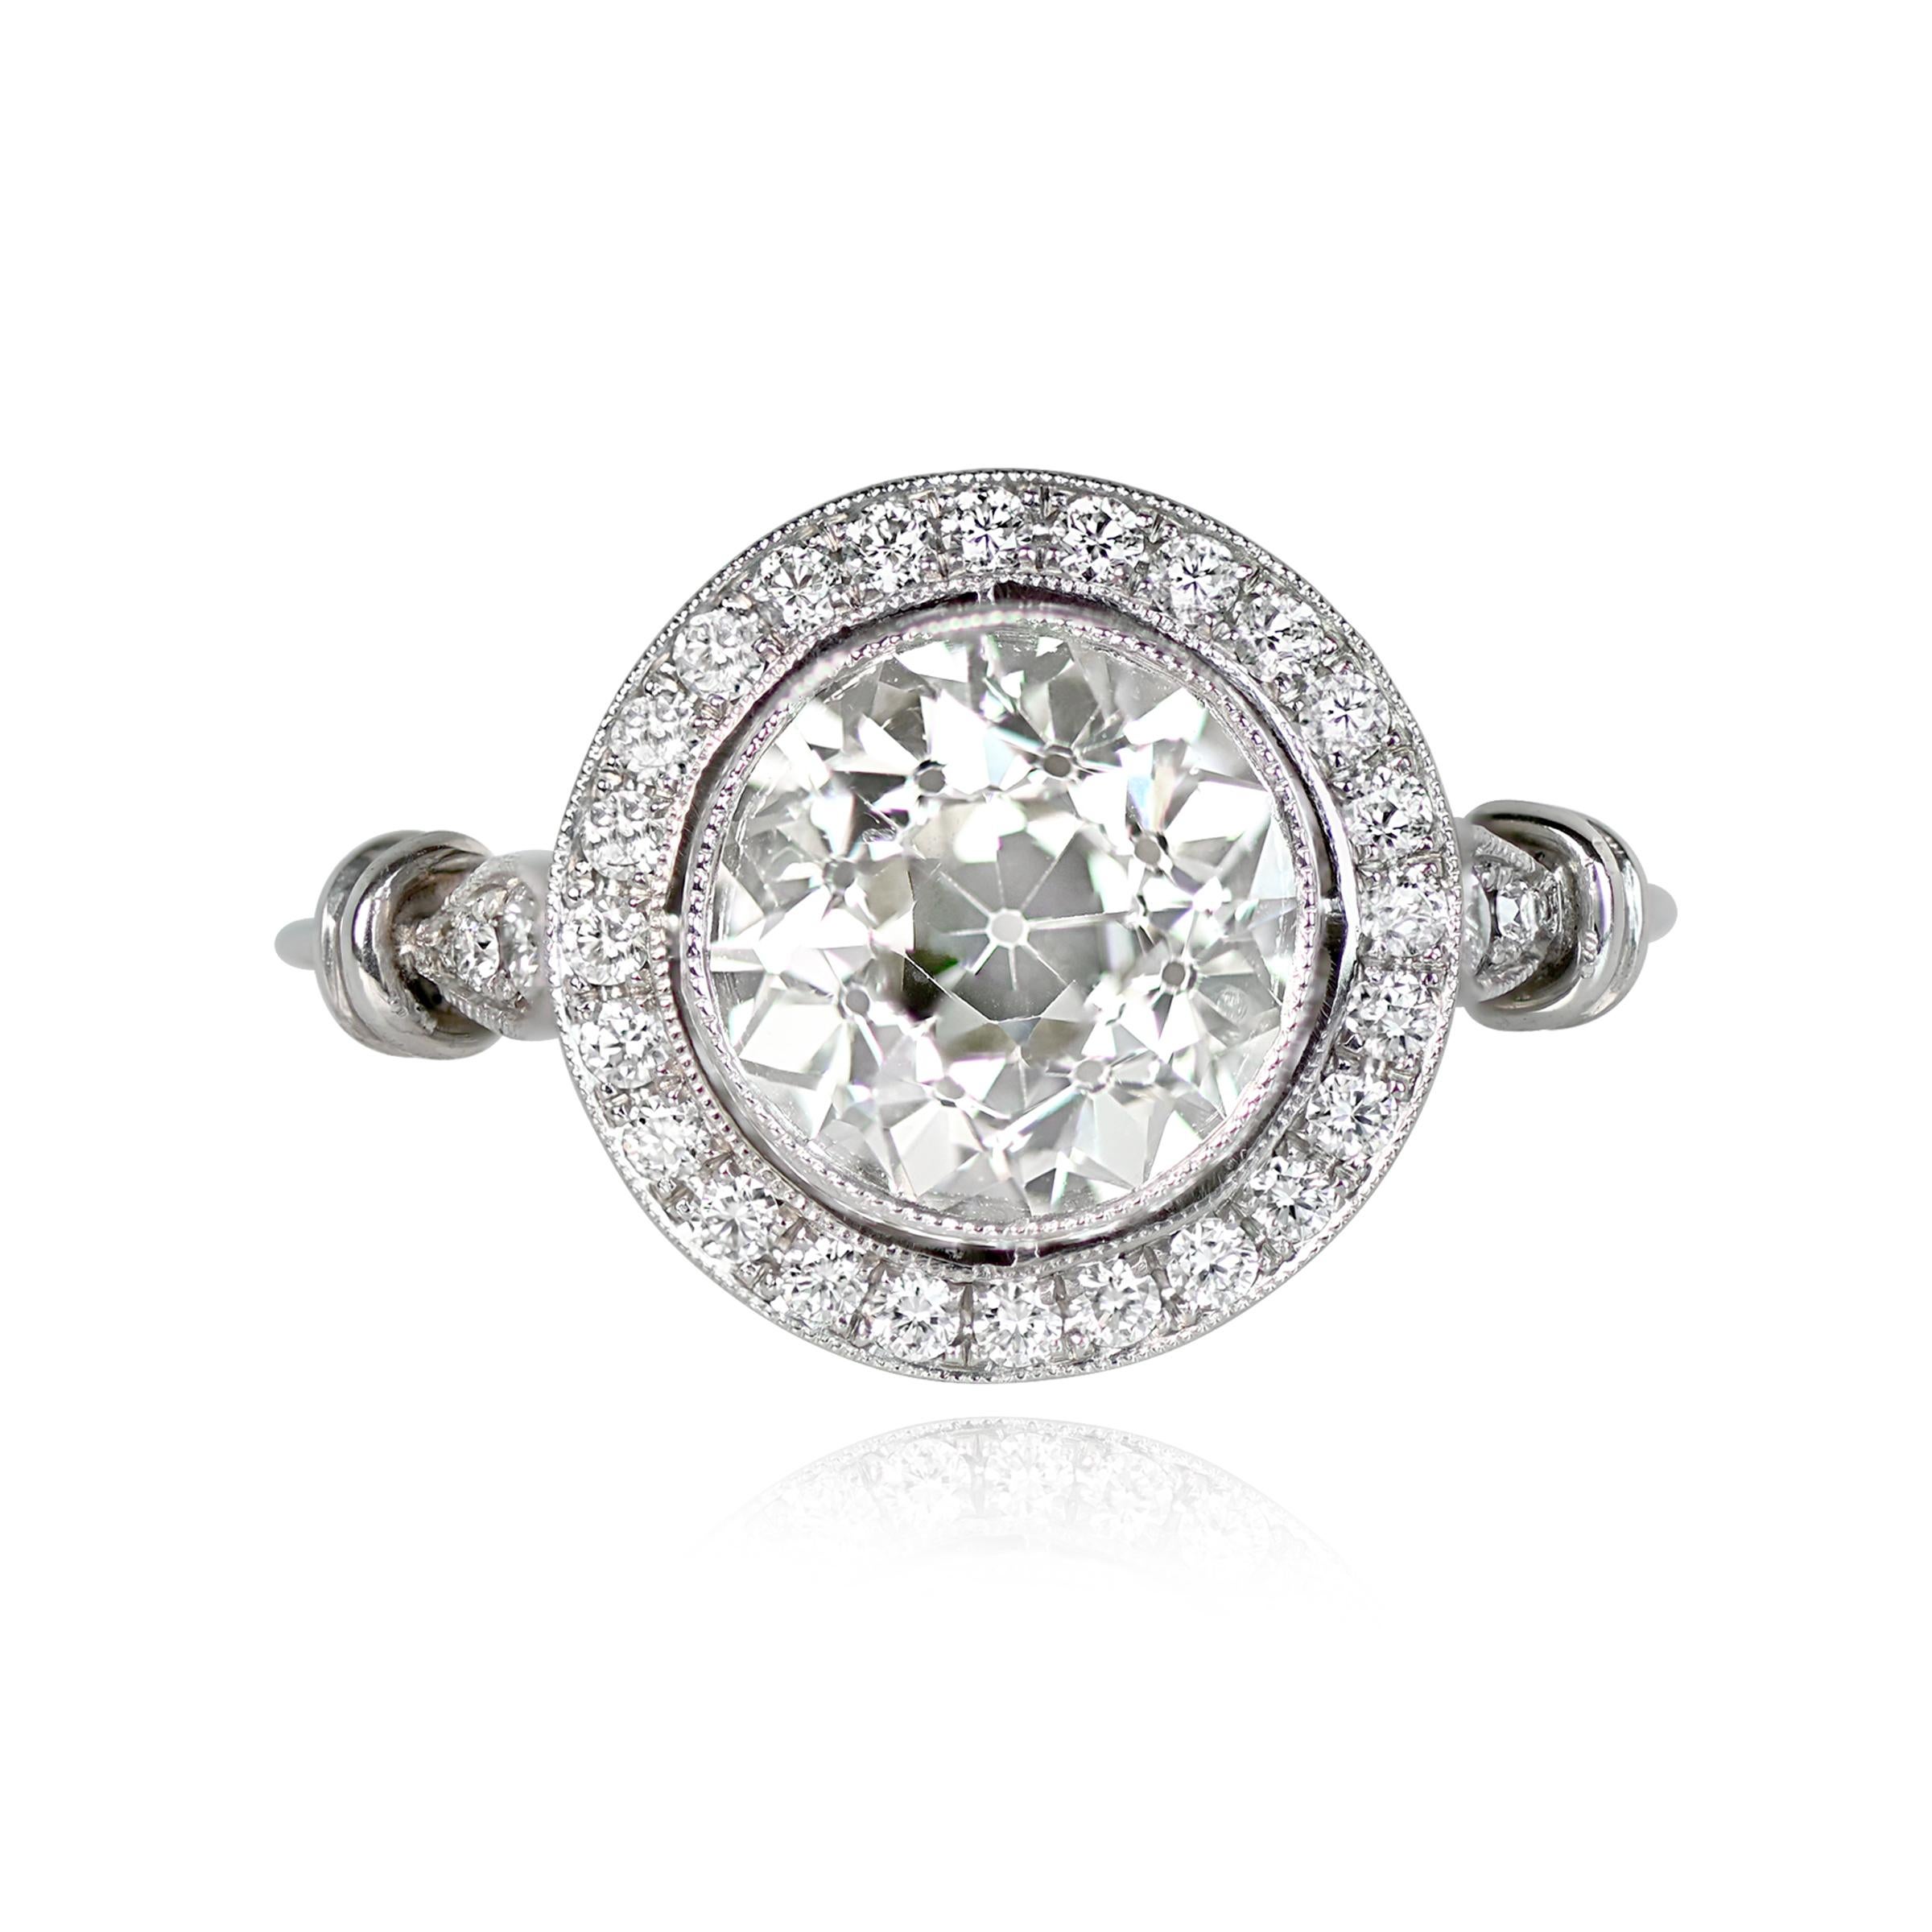 Halo engagement ring with a 2.25 carat old European cut diamond in L color and VS1 clarity. The center diamond is bezel set and surrounded by pave-set round brilliant cut diamonds. Marquise-shaped bezels with round brilliant diamonds are on each